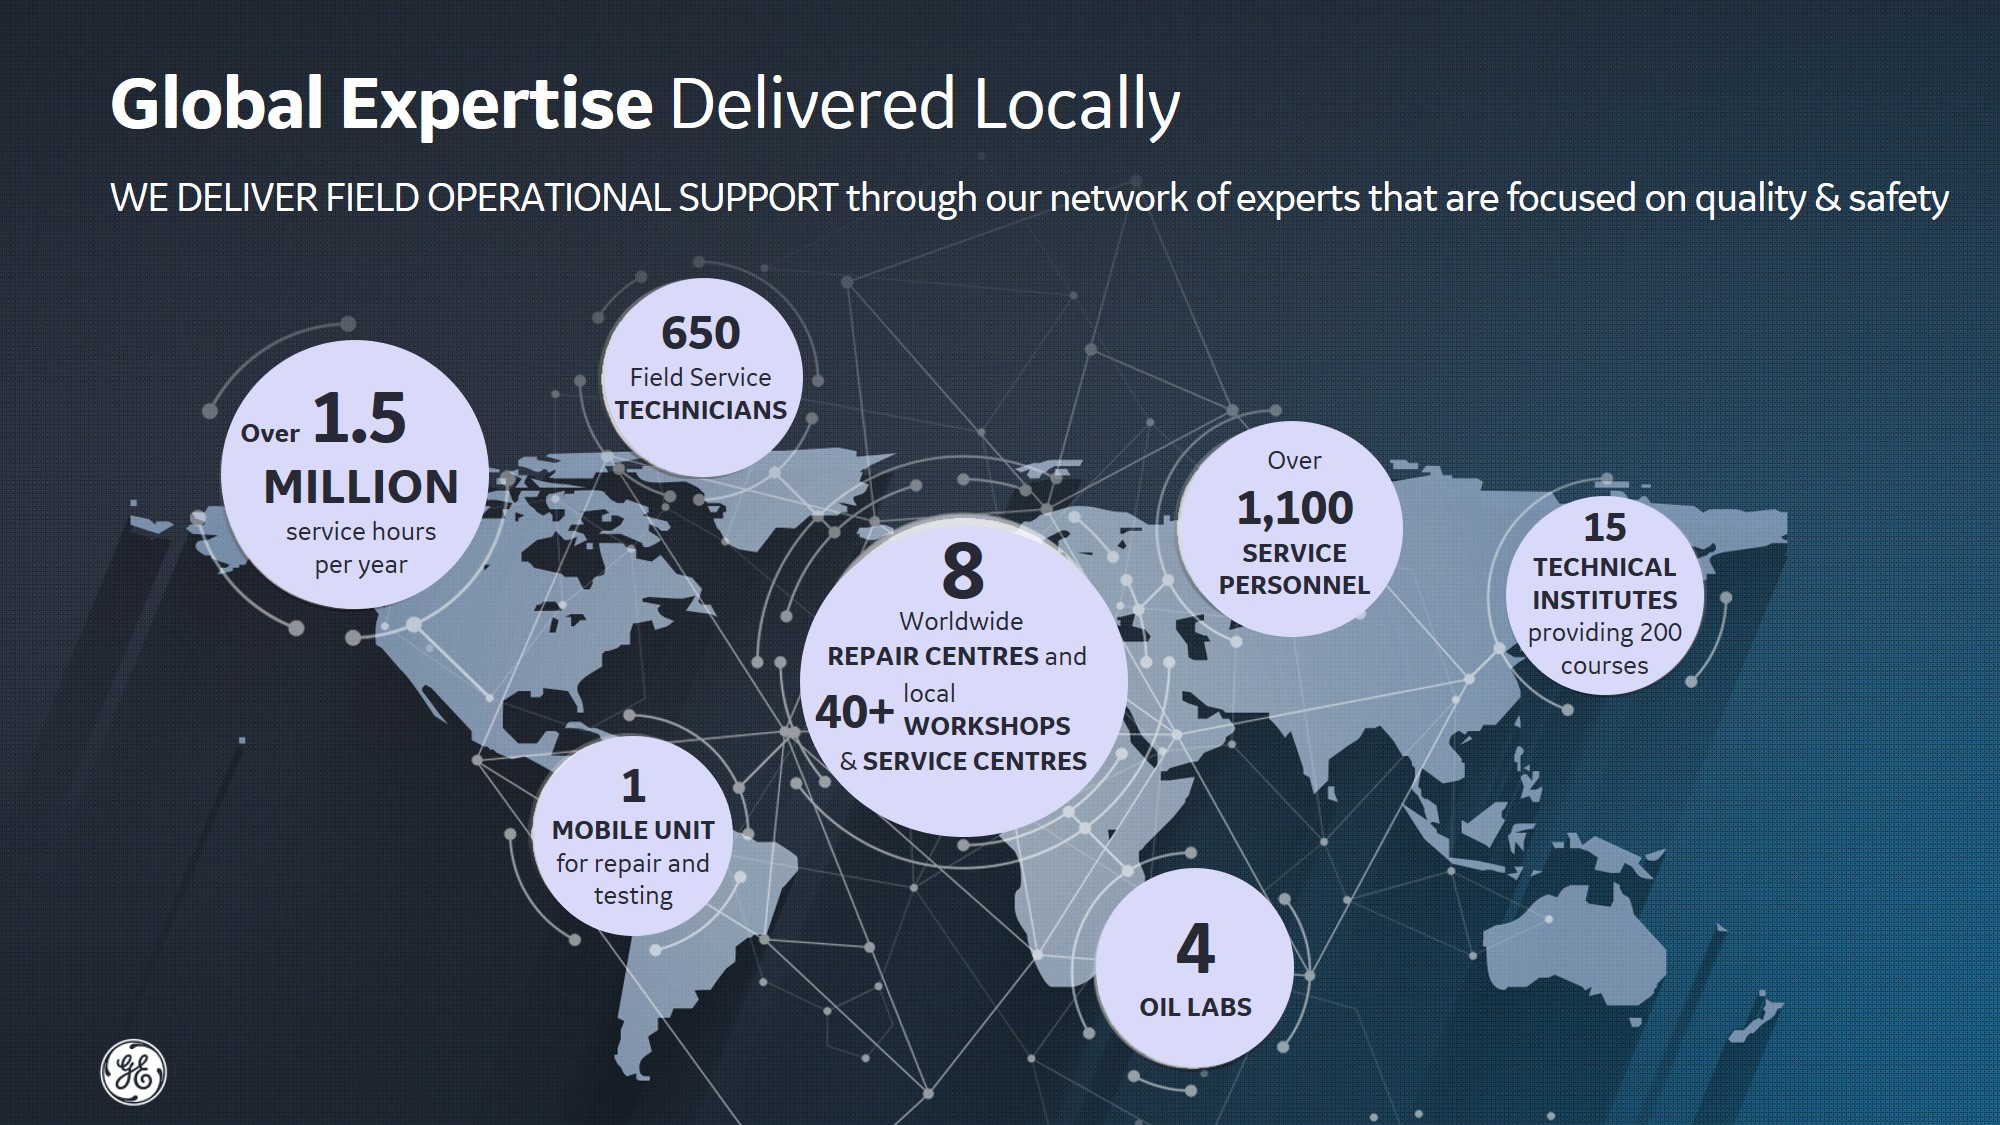 GE provides expertise delivered locally - we deliver field operational support through our network of experts that are focused on quality & safety